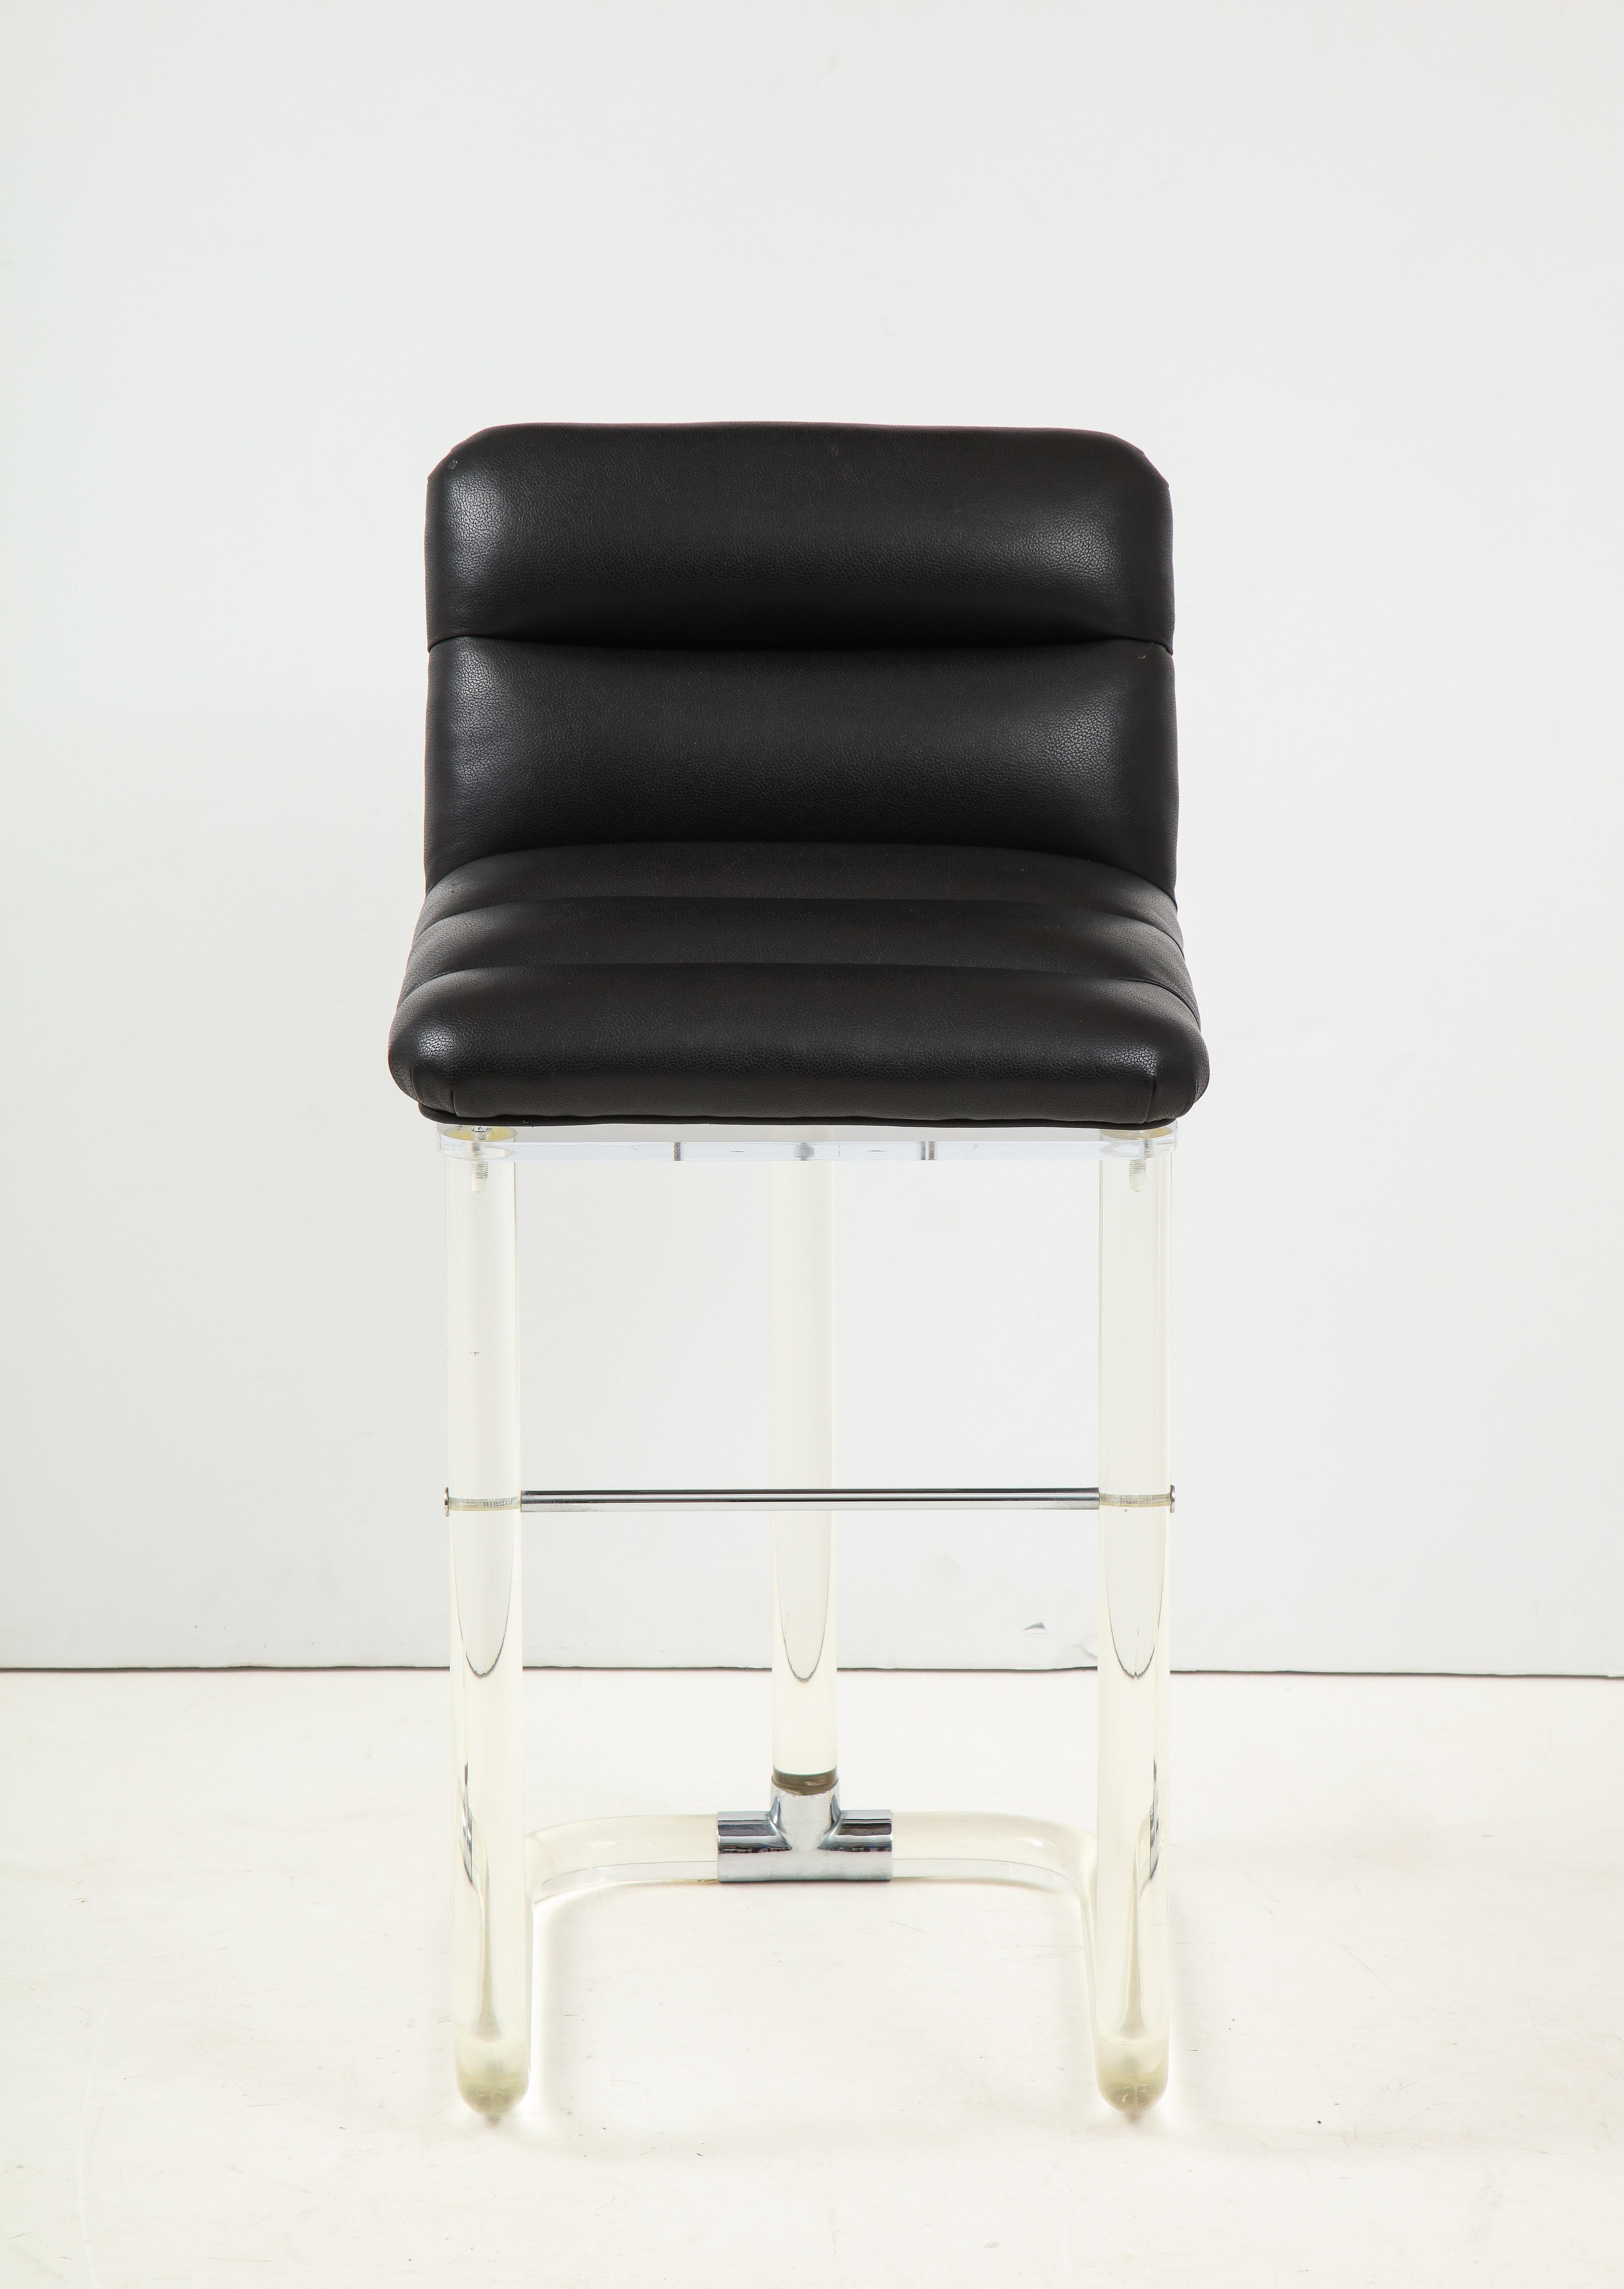 Set of 4 Mid-Century Lucite and Black Leather Upholstered Stools In Good Condition For Sale In New York, NY